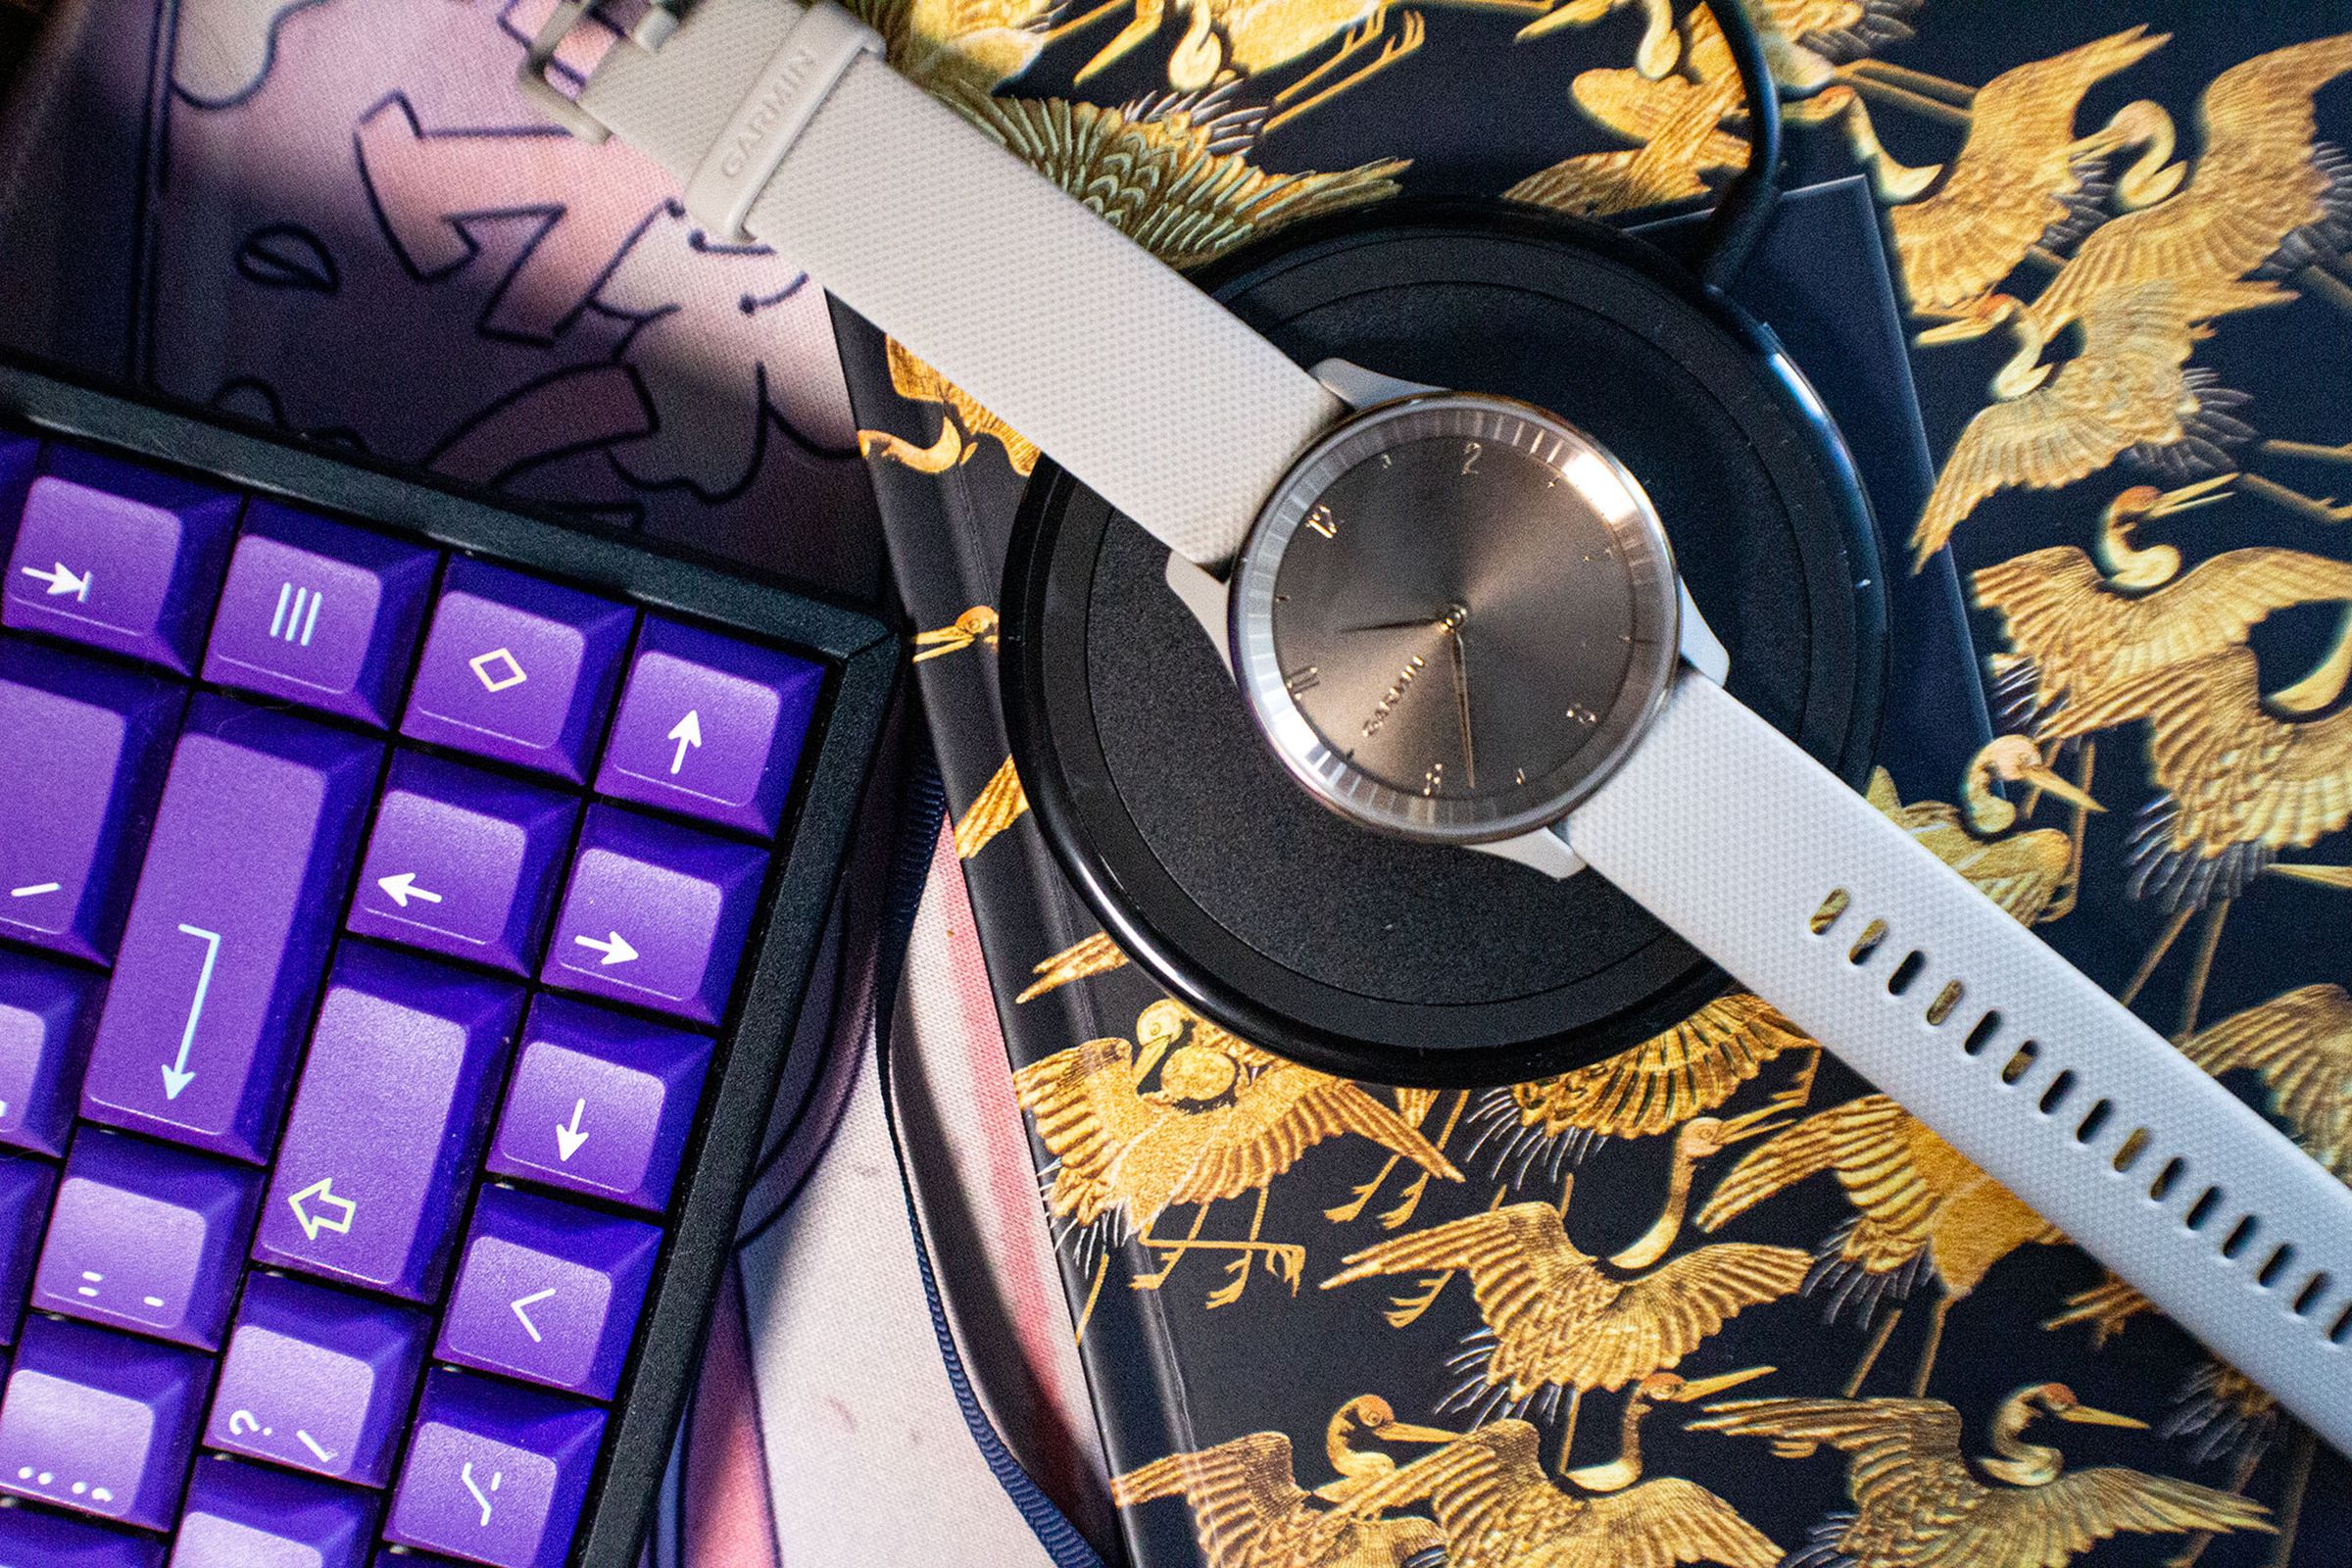 Garmin Vivomove Trend on a Qi charger, next to a purple keyboard and notebook with birds on it.